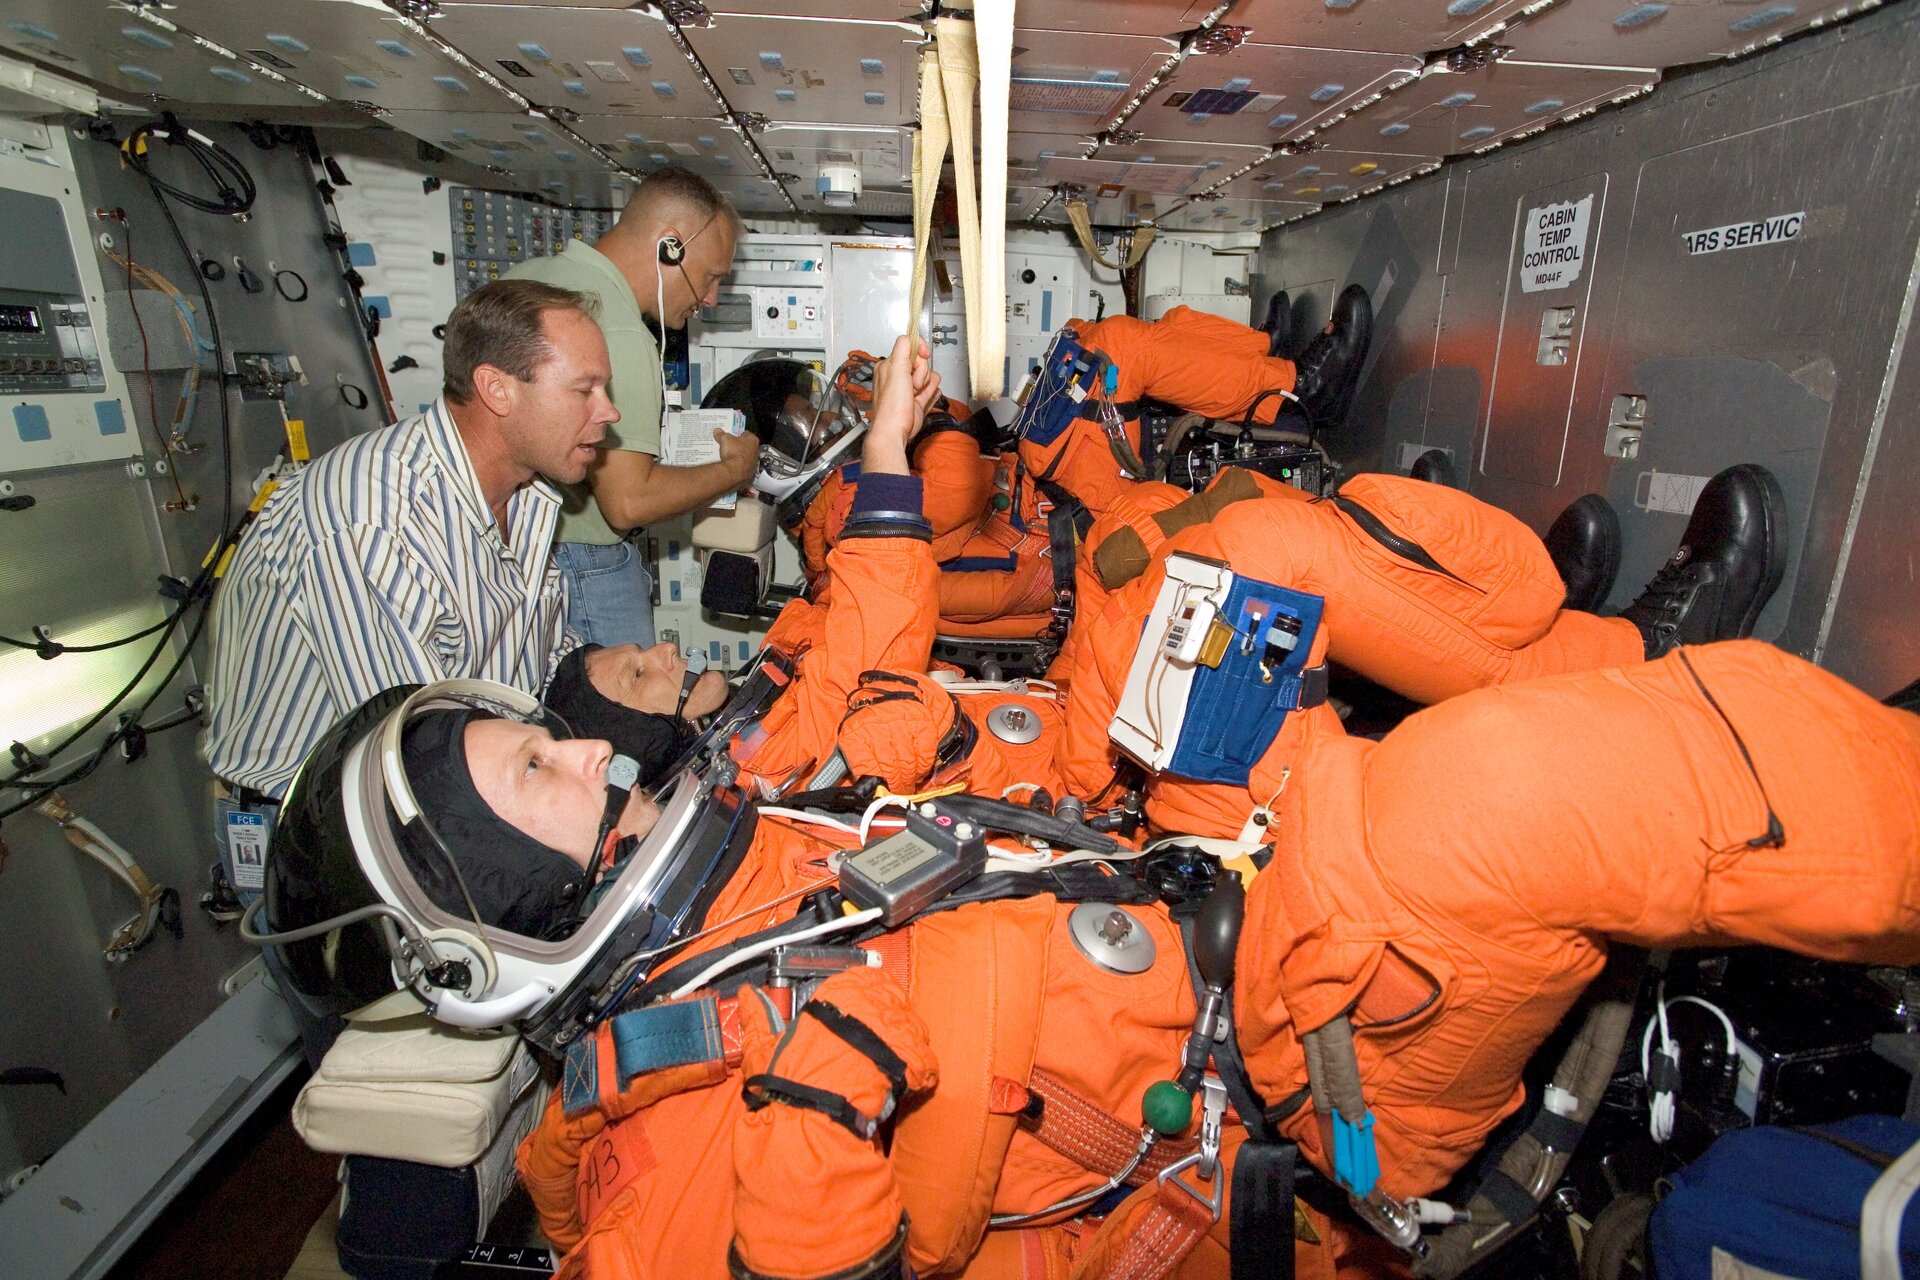 Crew members training for Astrolab mission